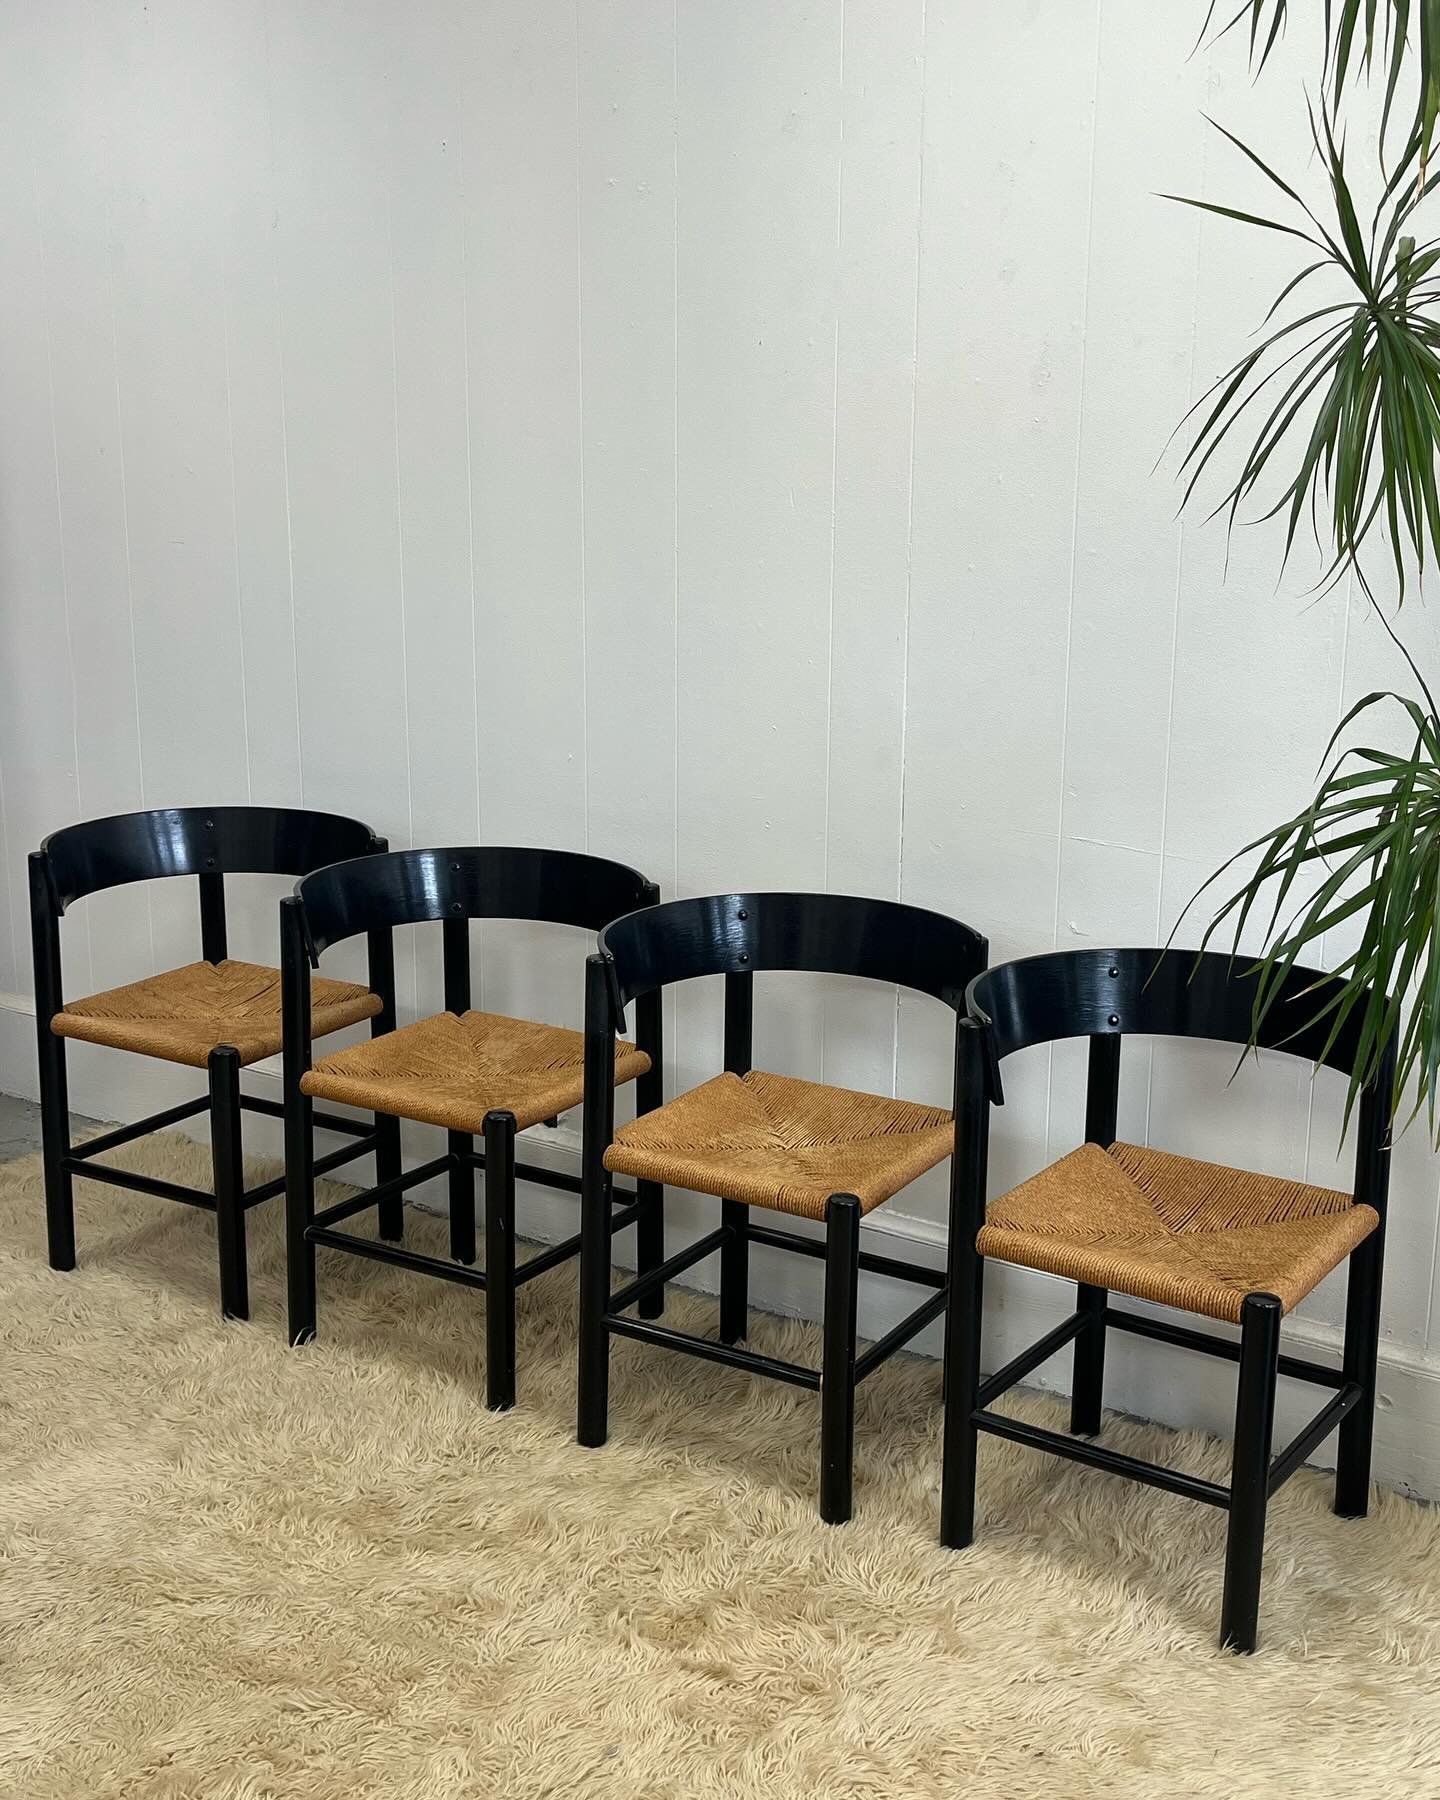 Set Of 4 Dining Chairs By Mogens Lassen For Fritz Hansen, 1960&rsquo;s 

$785 + tax set 

Excellent Vintage Condition, some very minor scratches and scuffs here and there 

Back H 28.5&rdquo;, Seat H 18&rdquo; , D 16.5&rdquo; , W 16.5&rdquo; 

Pictur